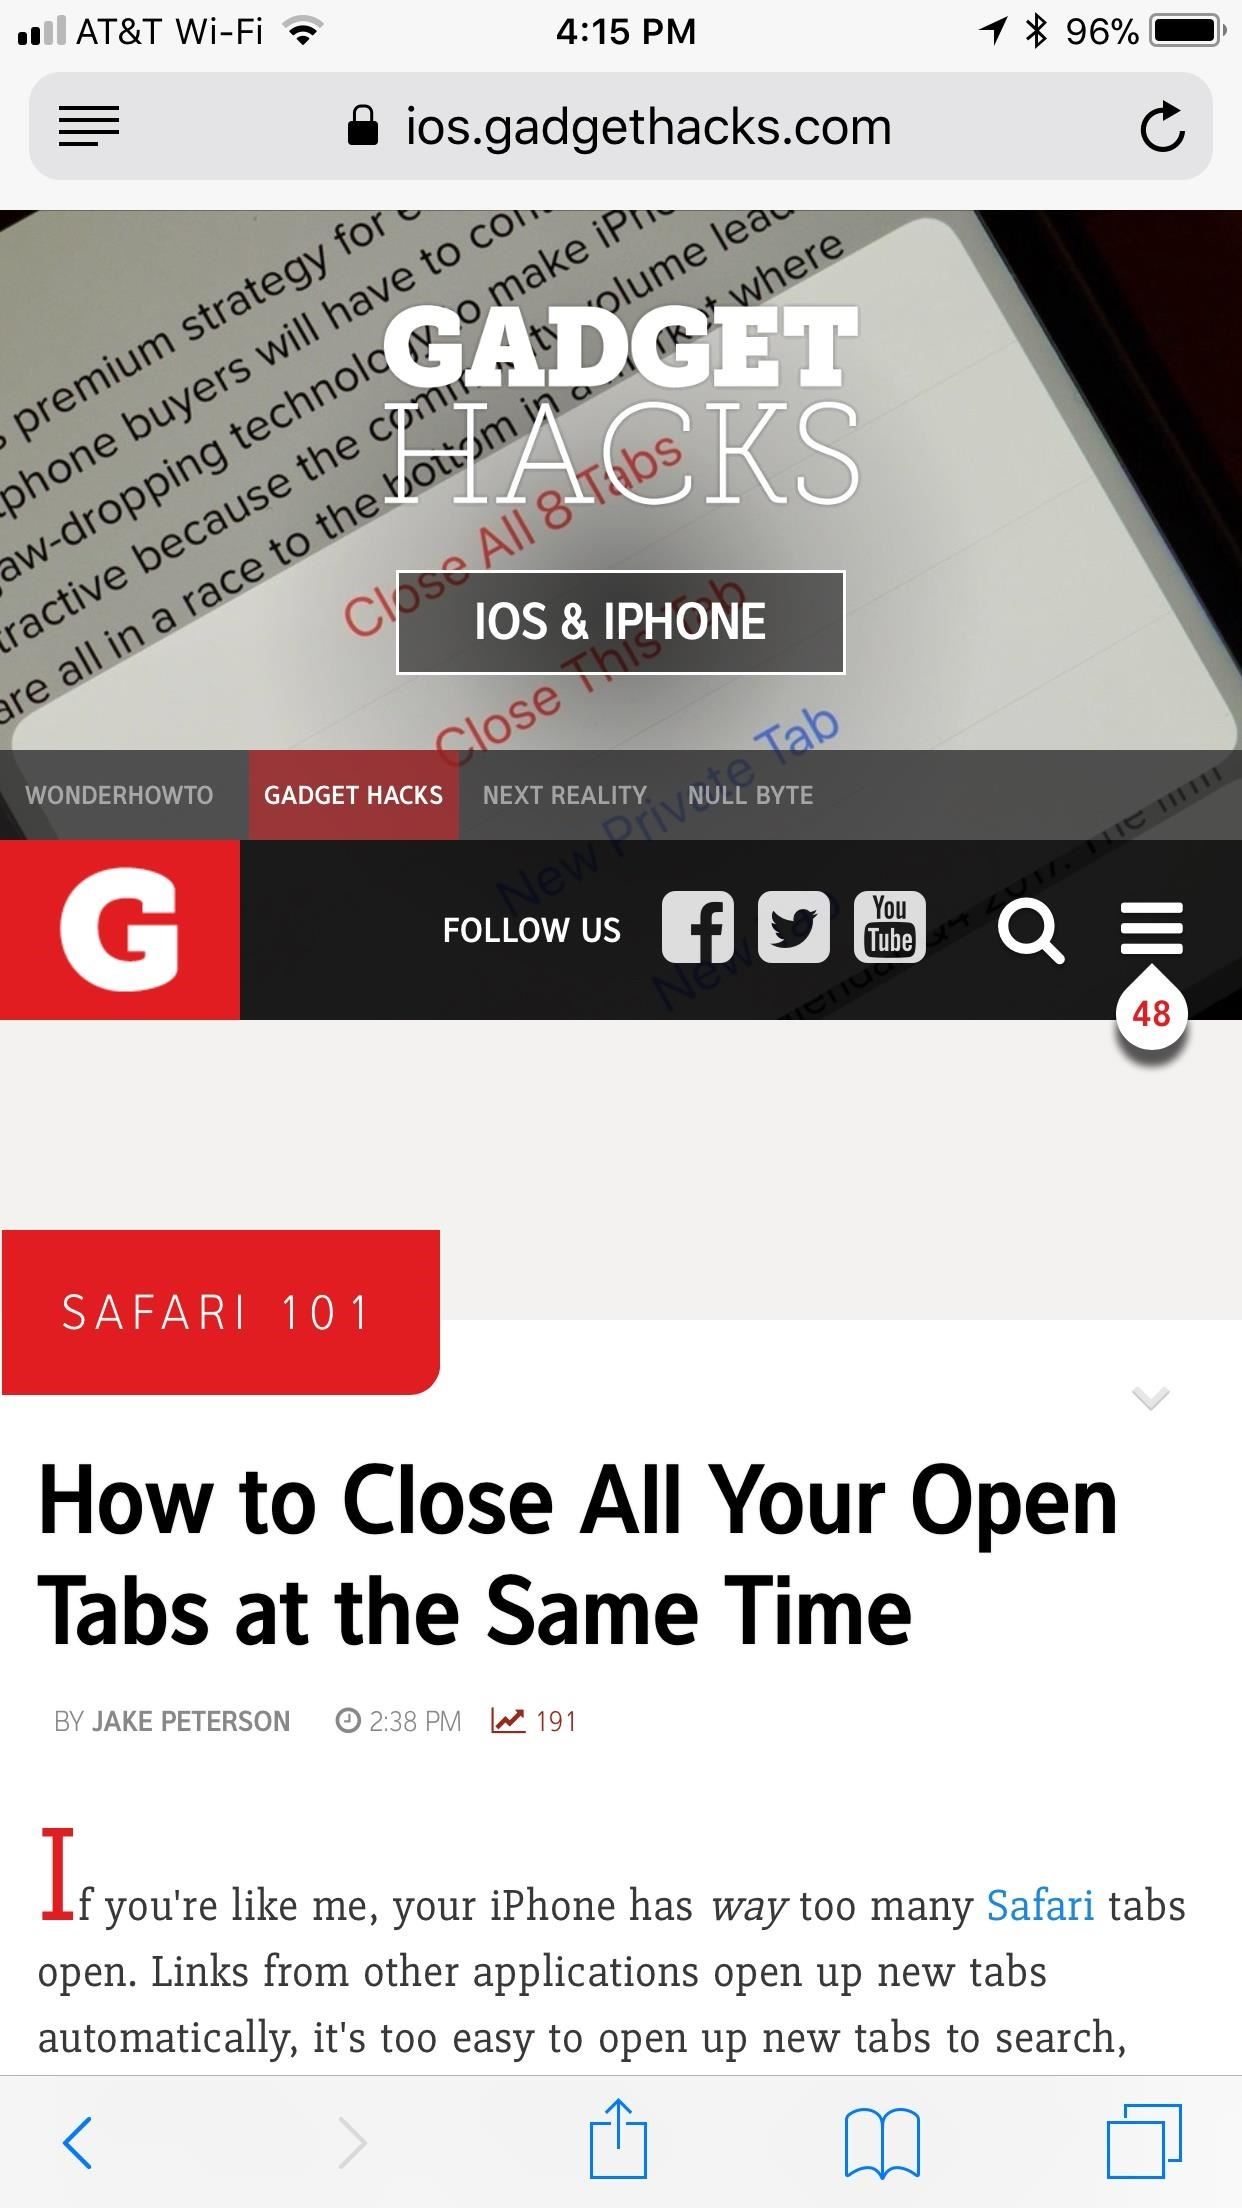 Safari 101: How to Save a Website or Webpage to Your Home Screen for Instant Access